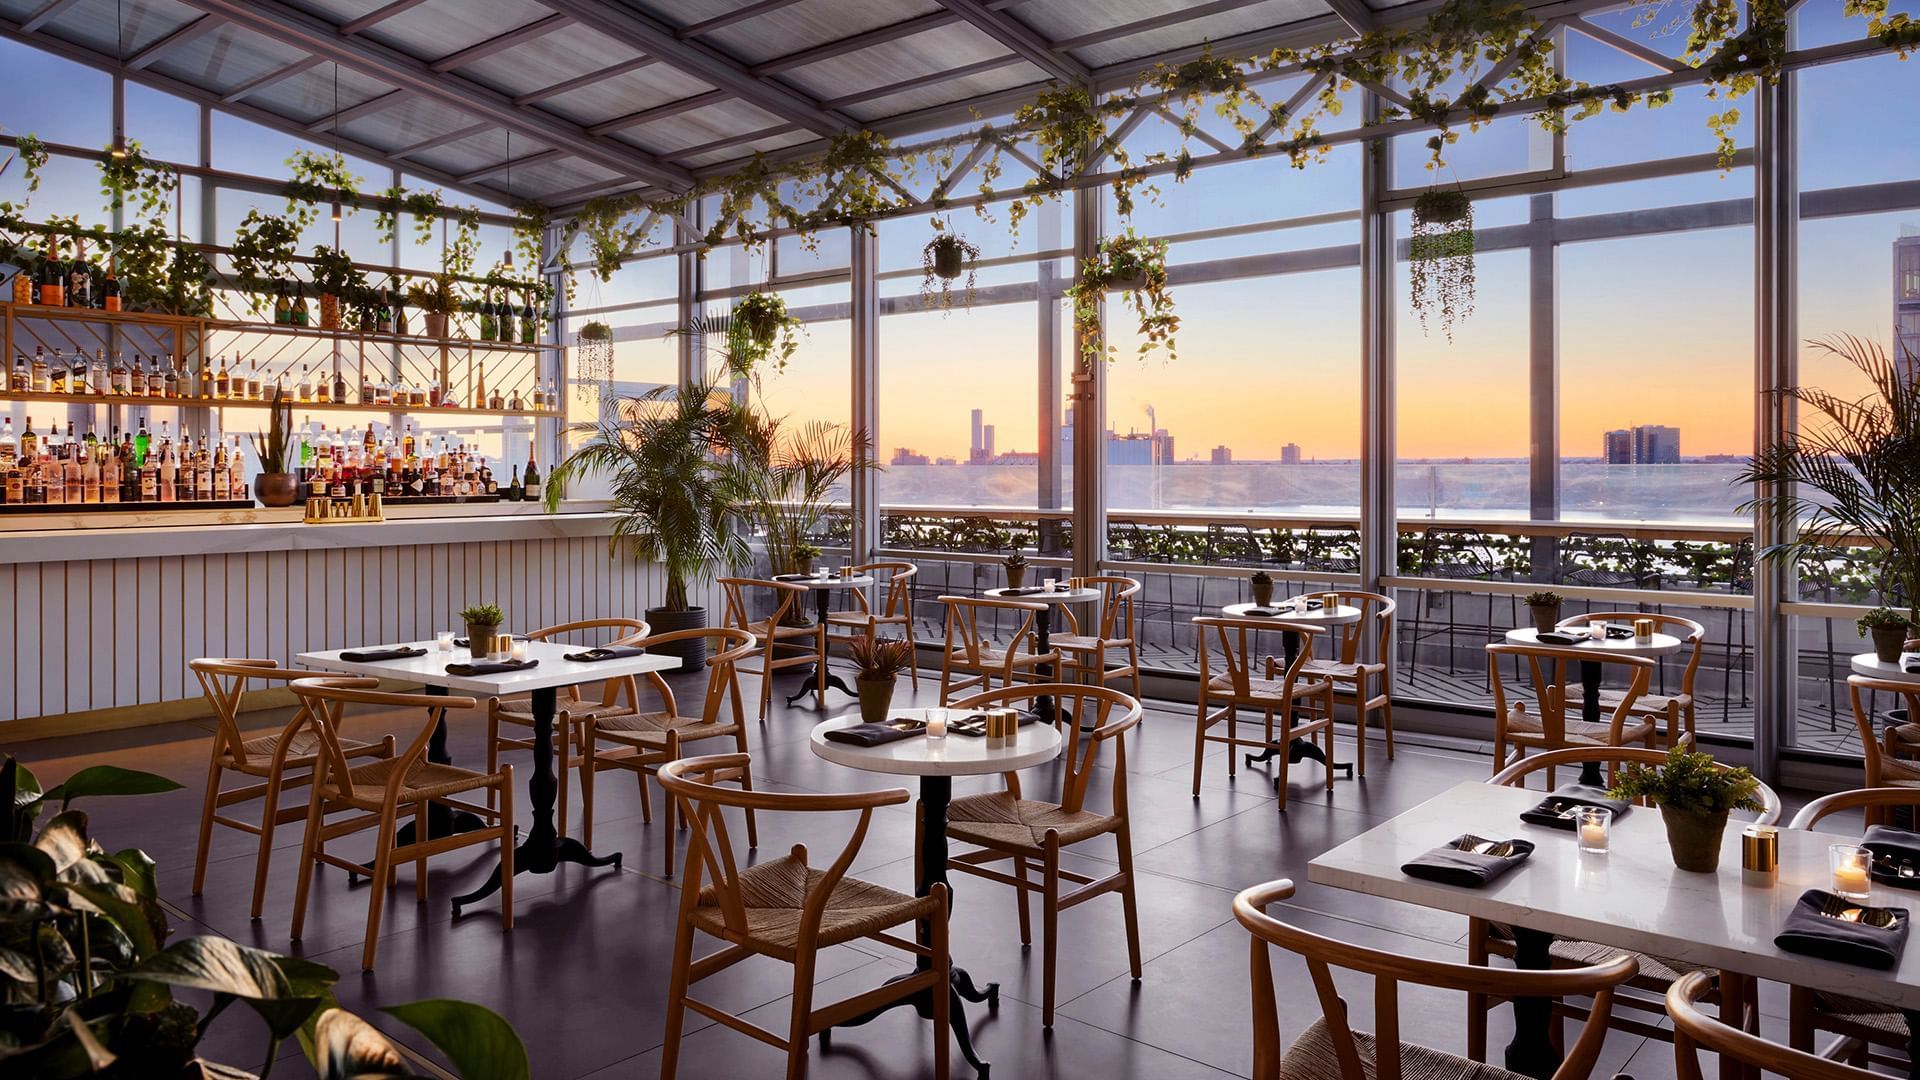 Meatpacking restaurants with a view - Gansevoort hotel New york 